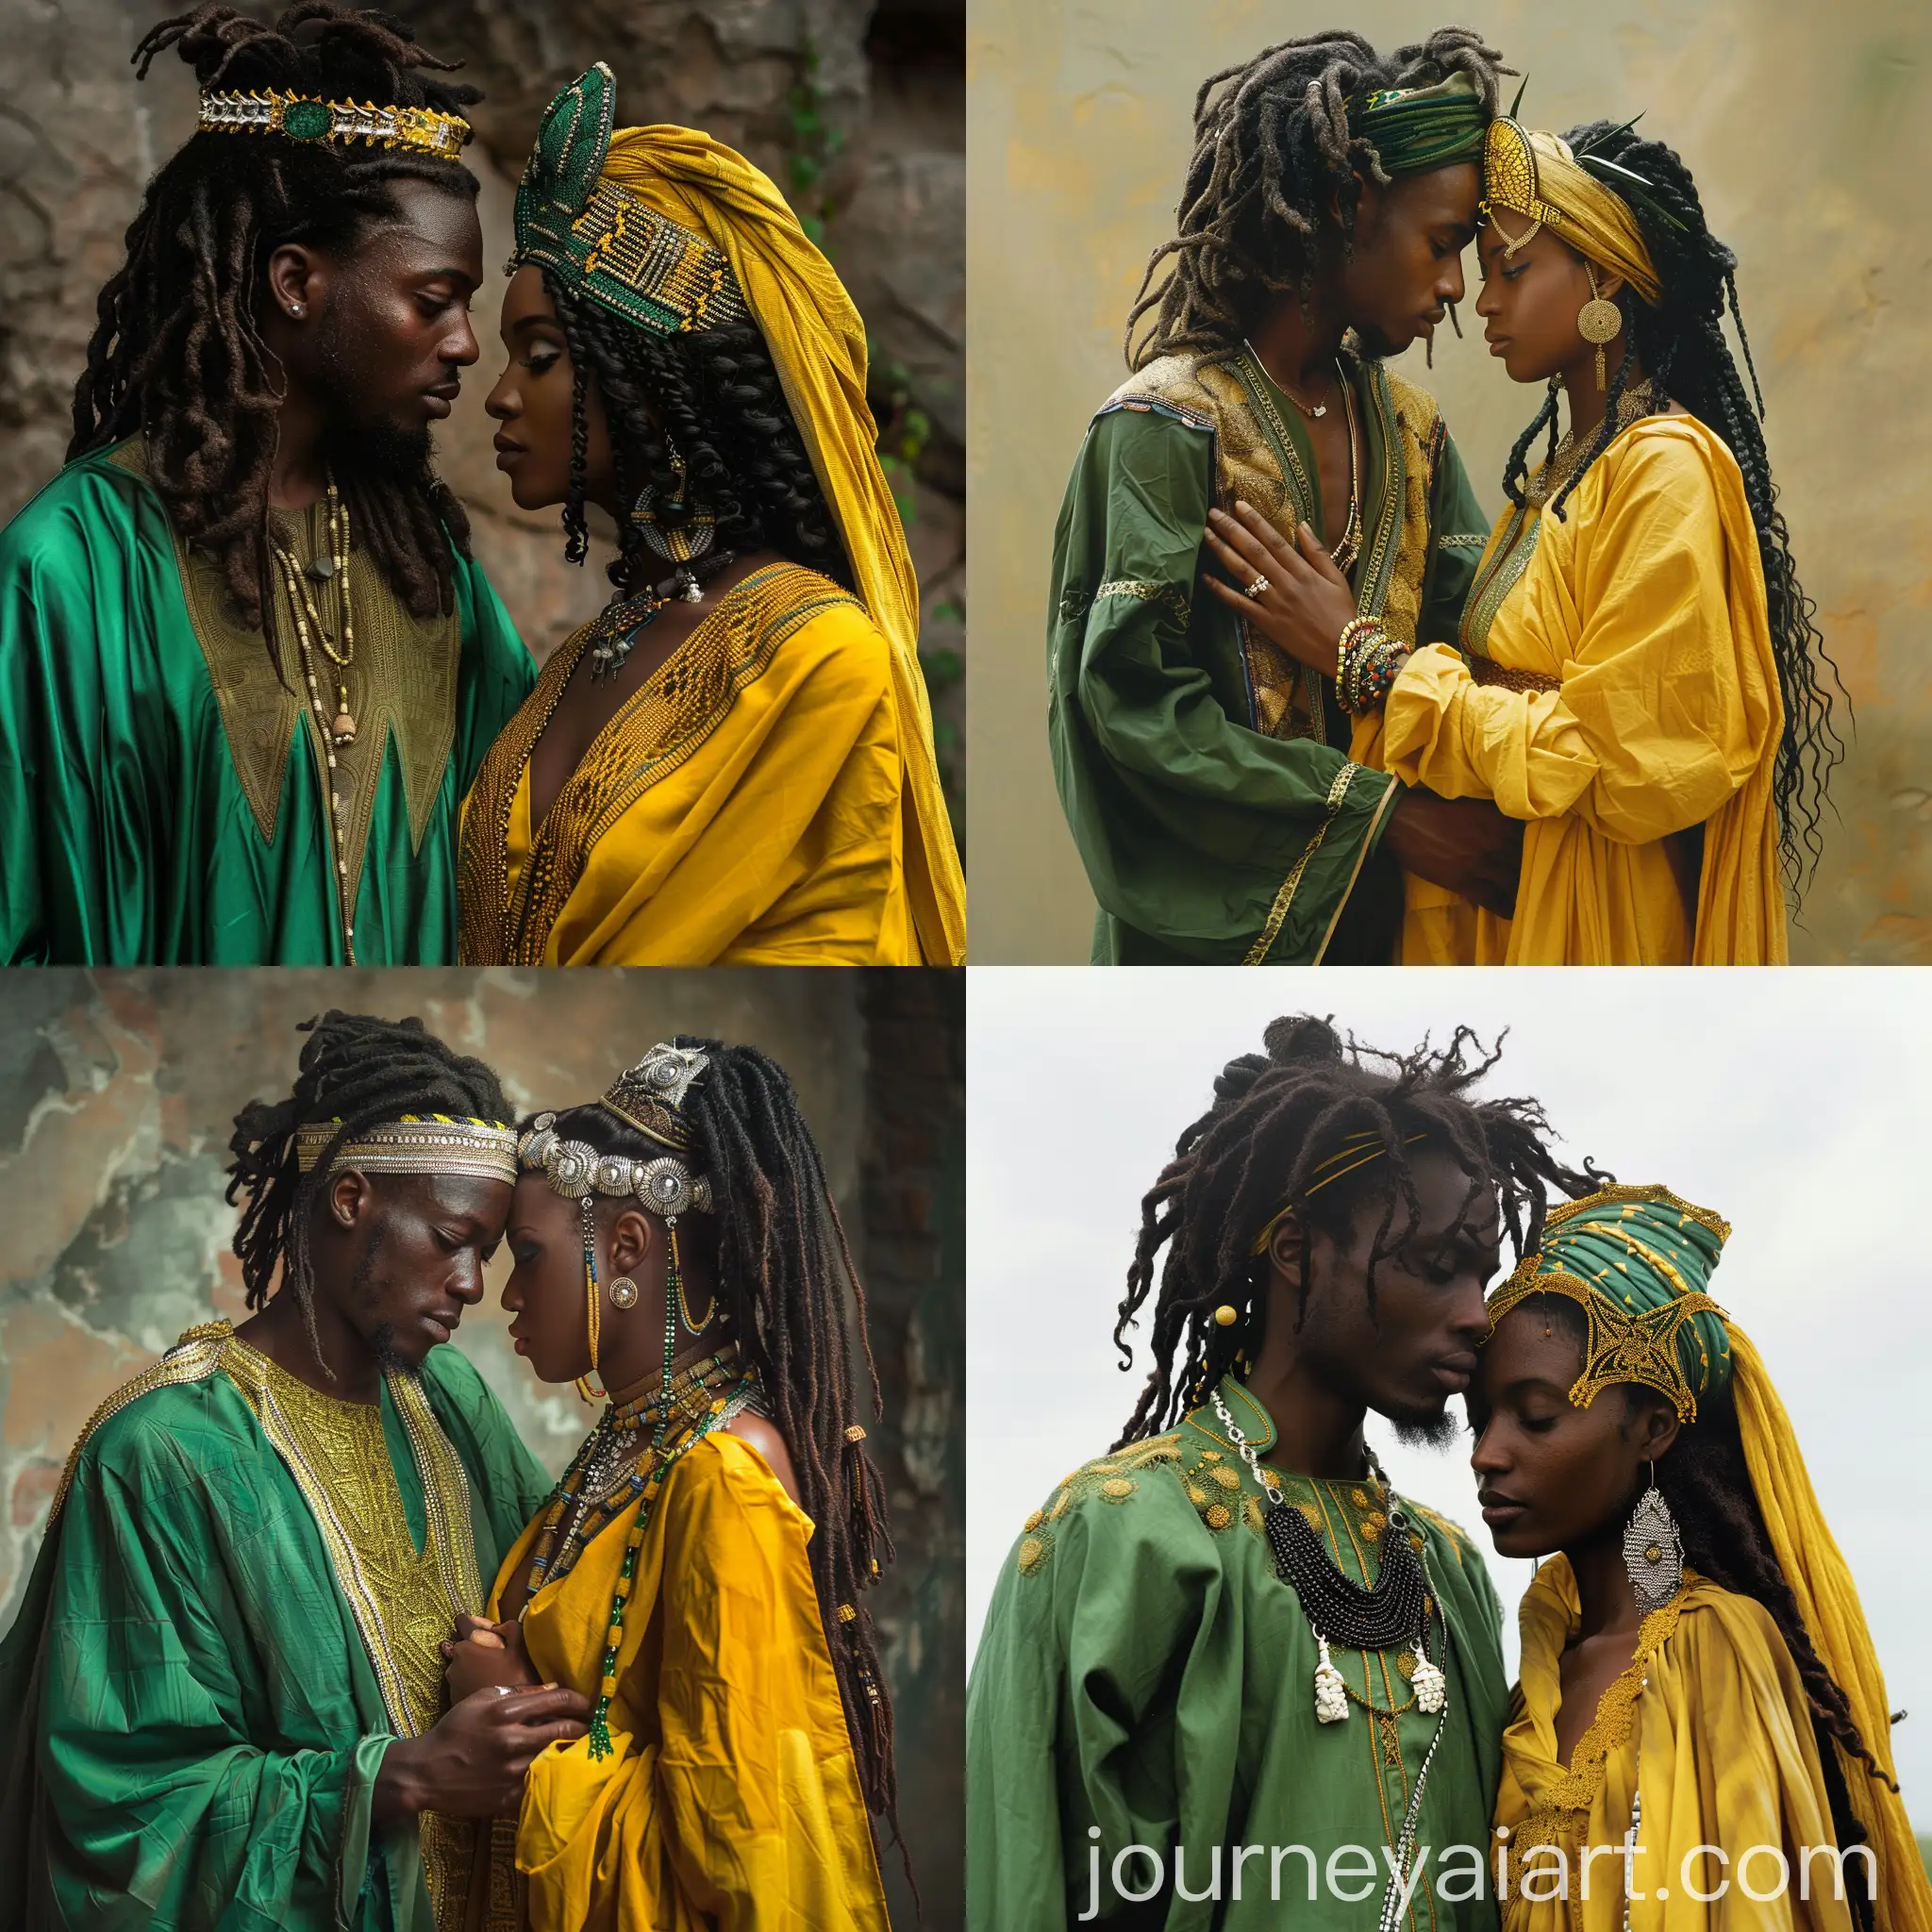 Intimate-Conversation-between-Young-Black-Man-and-Woman-in-Traditional-African-Attire